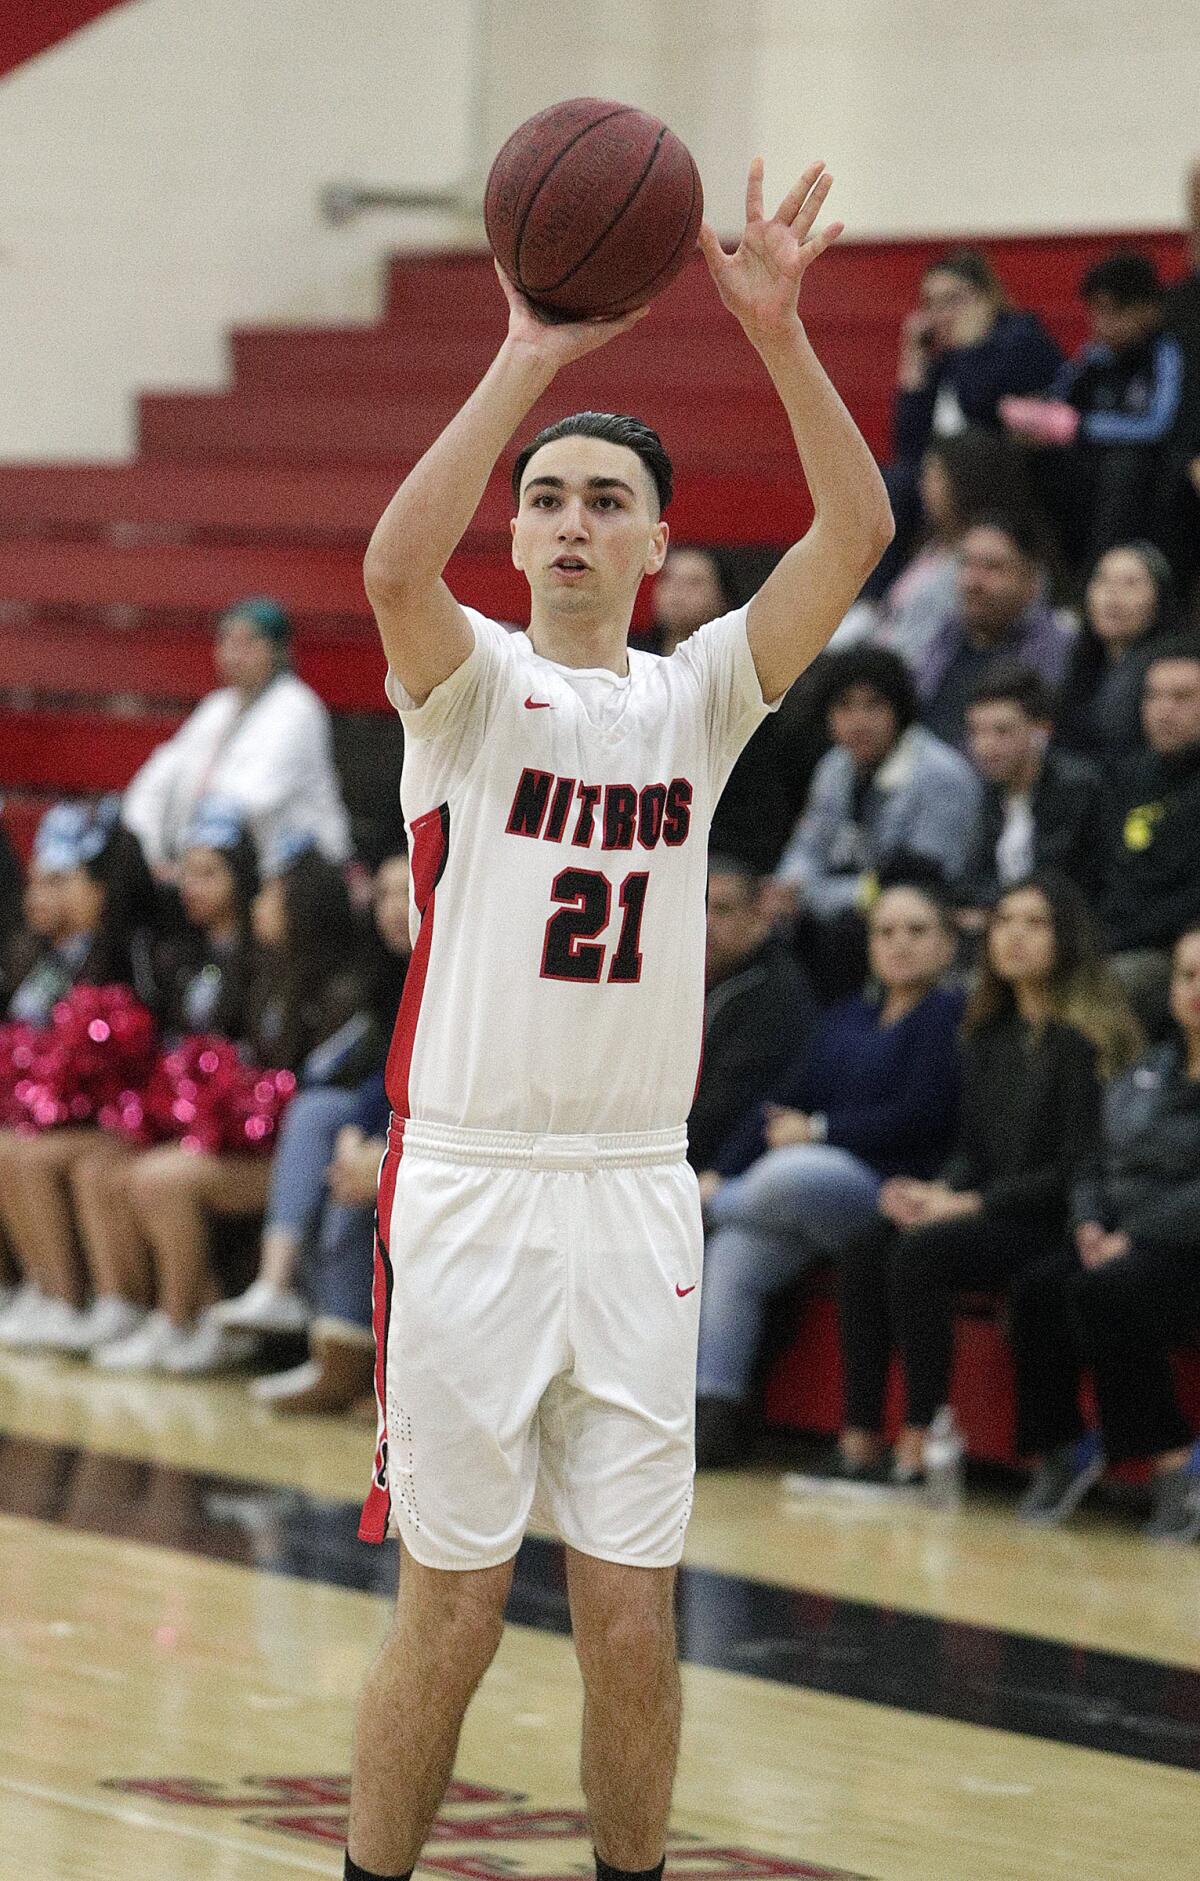 Glendale's Manouk Manoukian pulls up at the three-point line to shoot against Salesian in the CIF Southern Section division III-AAA second-round boys' basketball playoff in at Glendale High School on Friday, February 14, 2020. Salesian won the game in overtime beating Glendale 55-49.